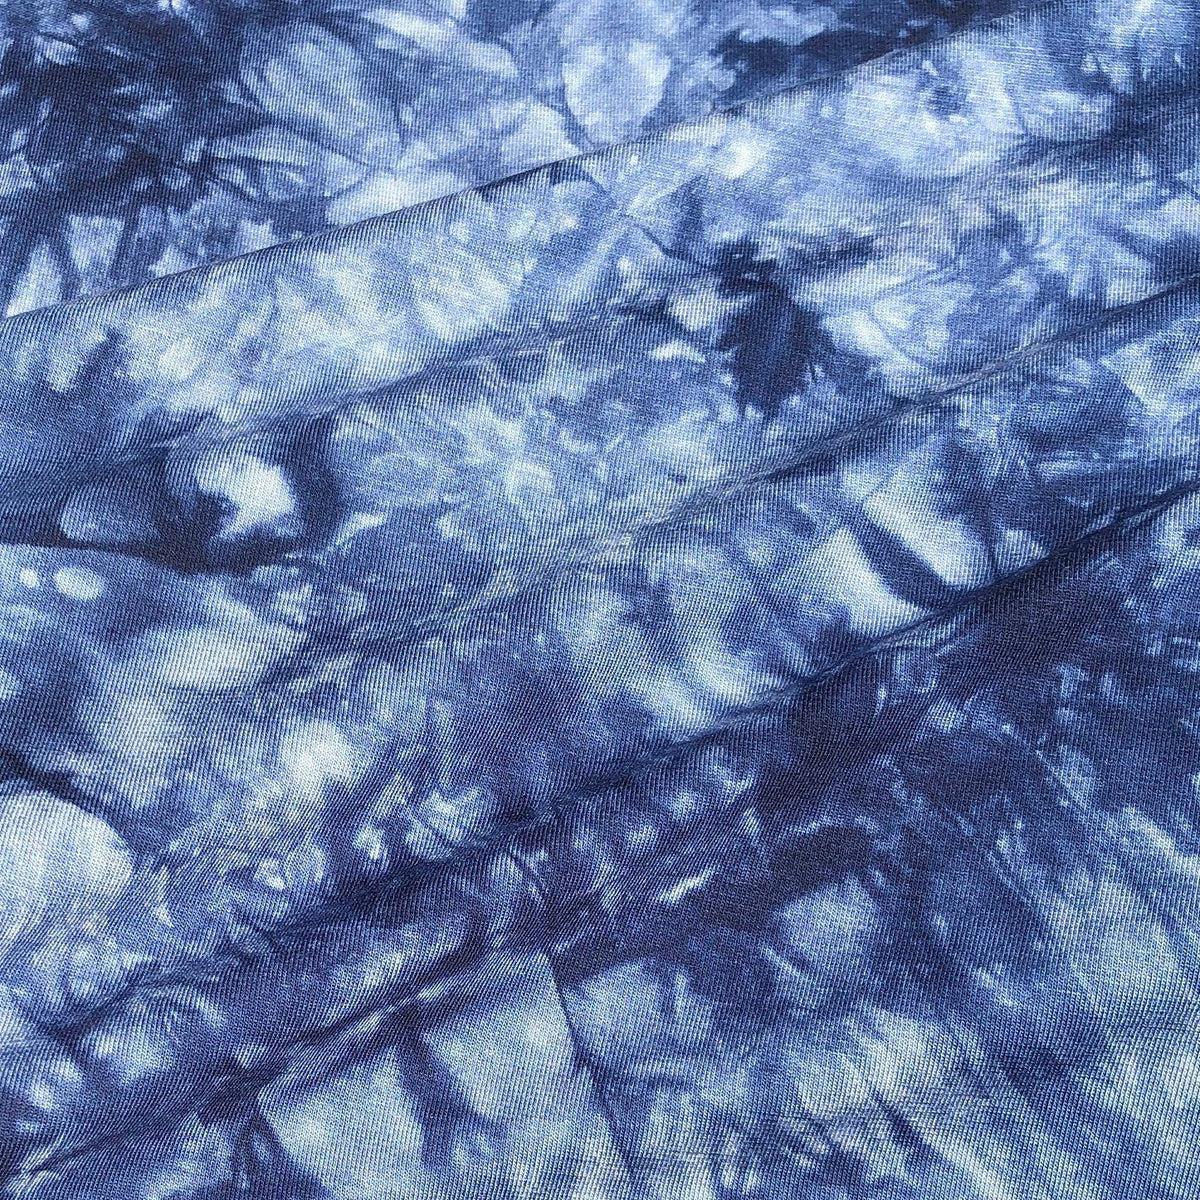 60” Bamboo & Spandex Stretch Tie Dyed Tie Dye Dark Navy Blue Apparel Jersey  Knit Fabric By the Yard